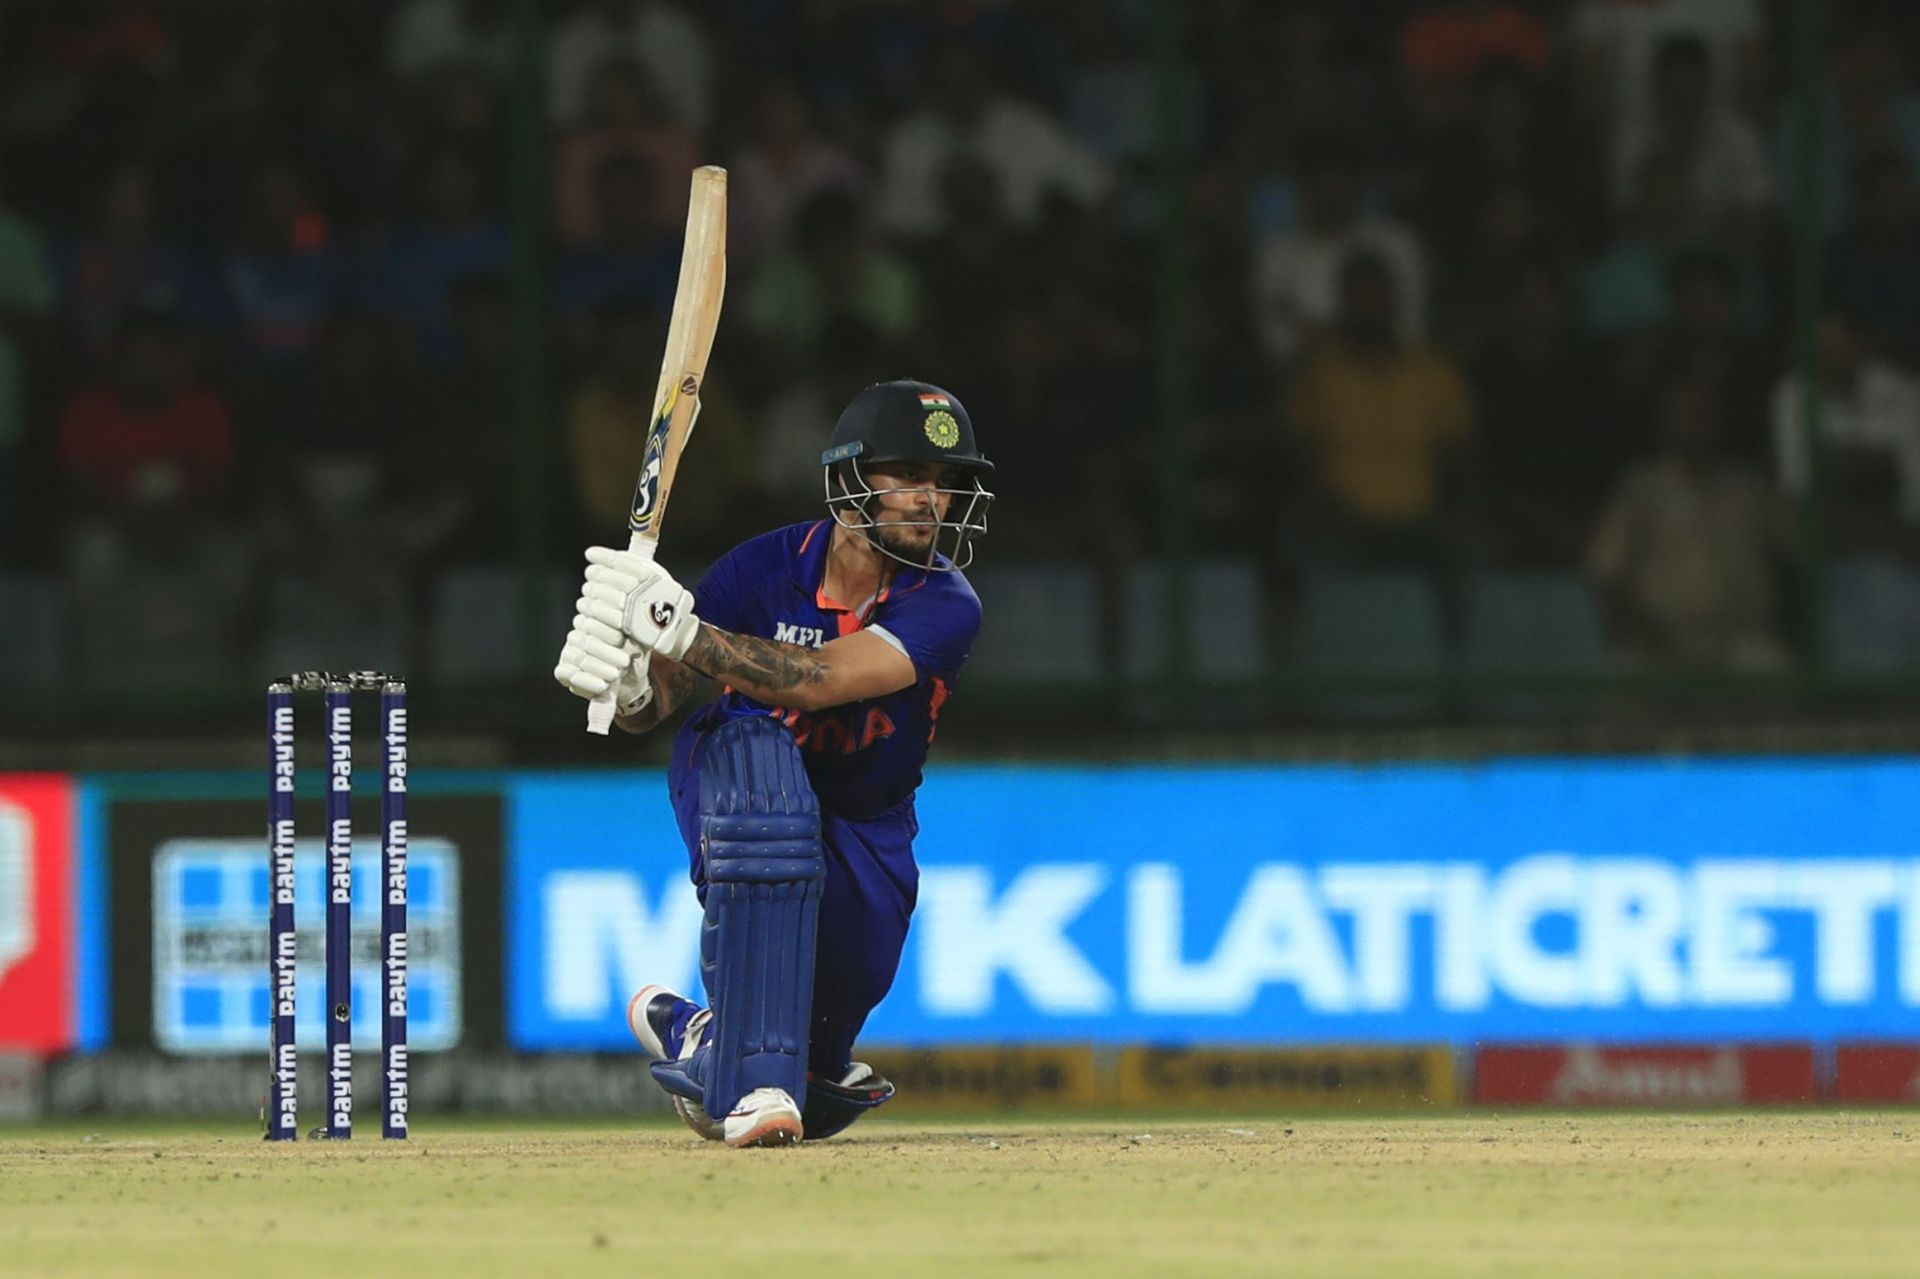 Ishan Kishan scored a belligerent fifty against South Africa at Delhi